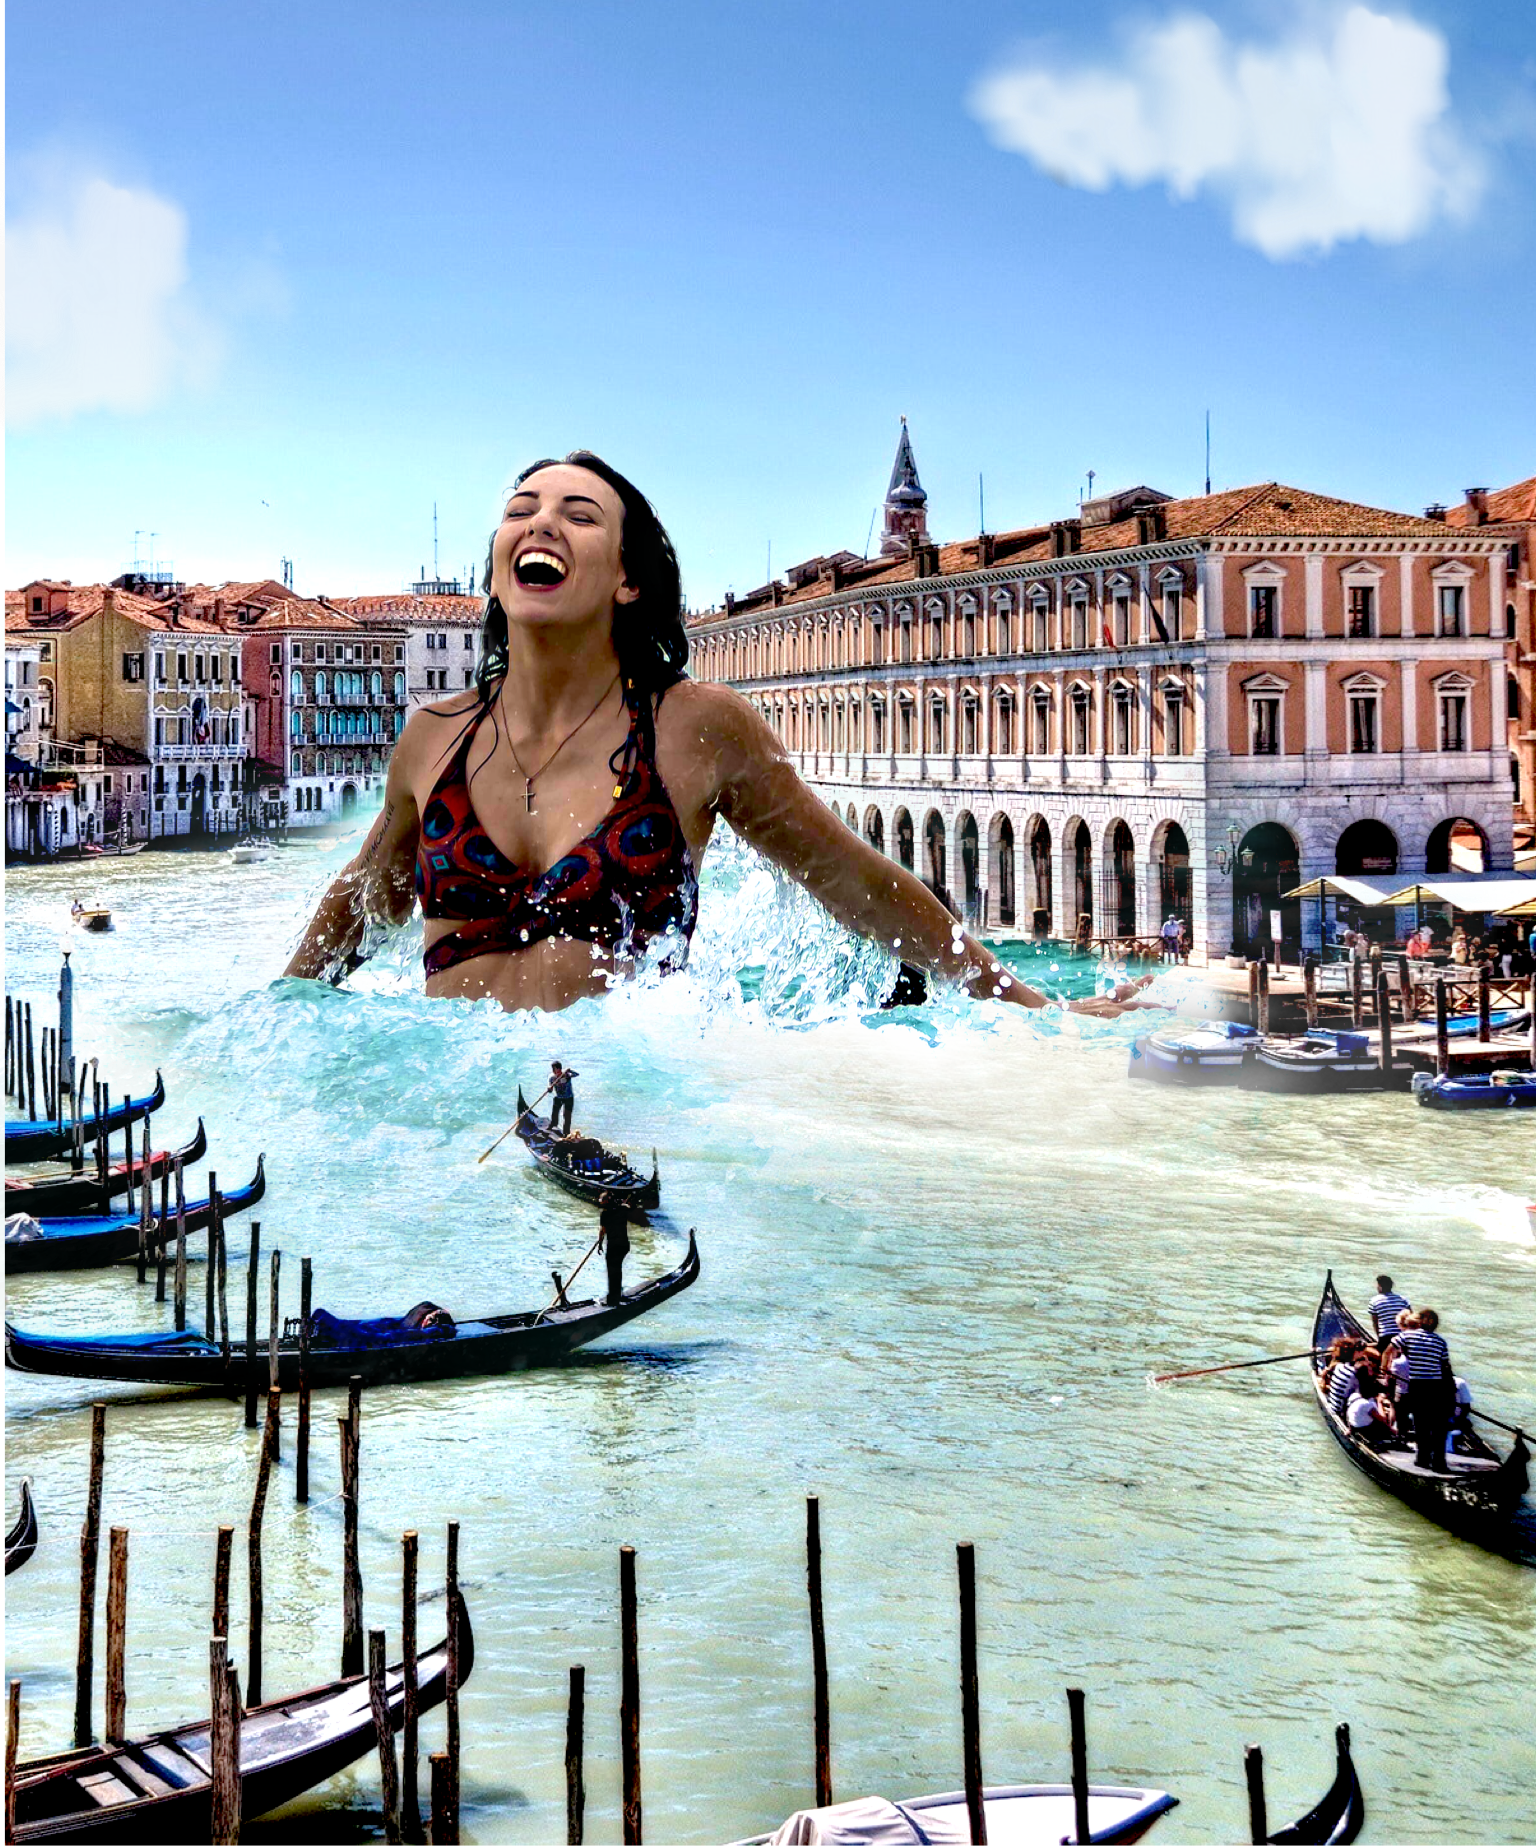 A Woman In A Bikini Jumping Into A Body Of Water Collage Art Template